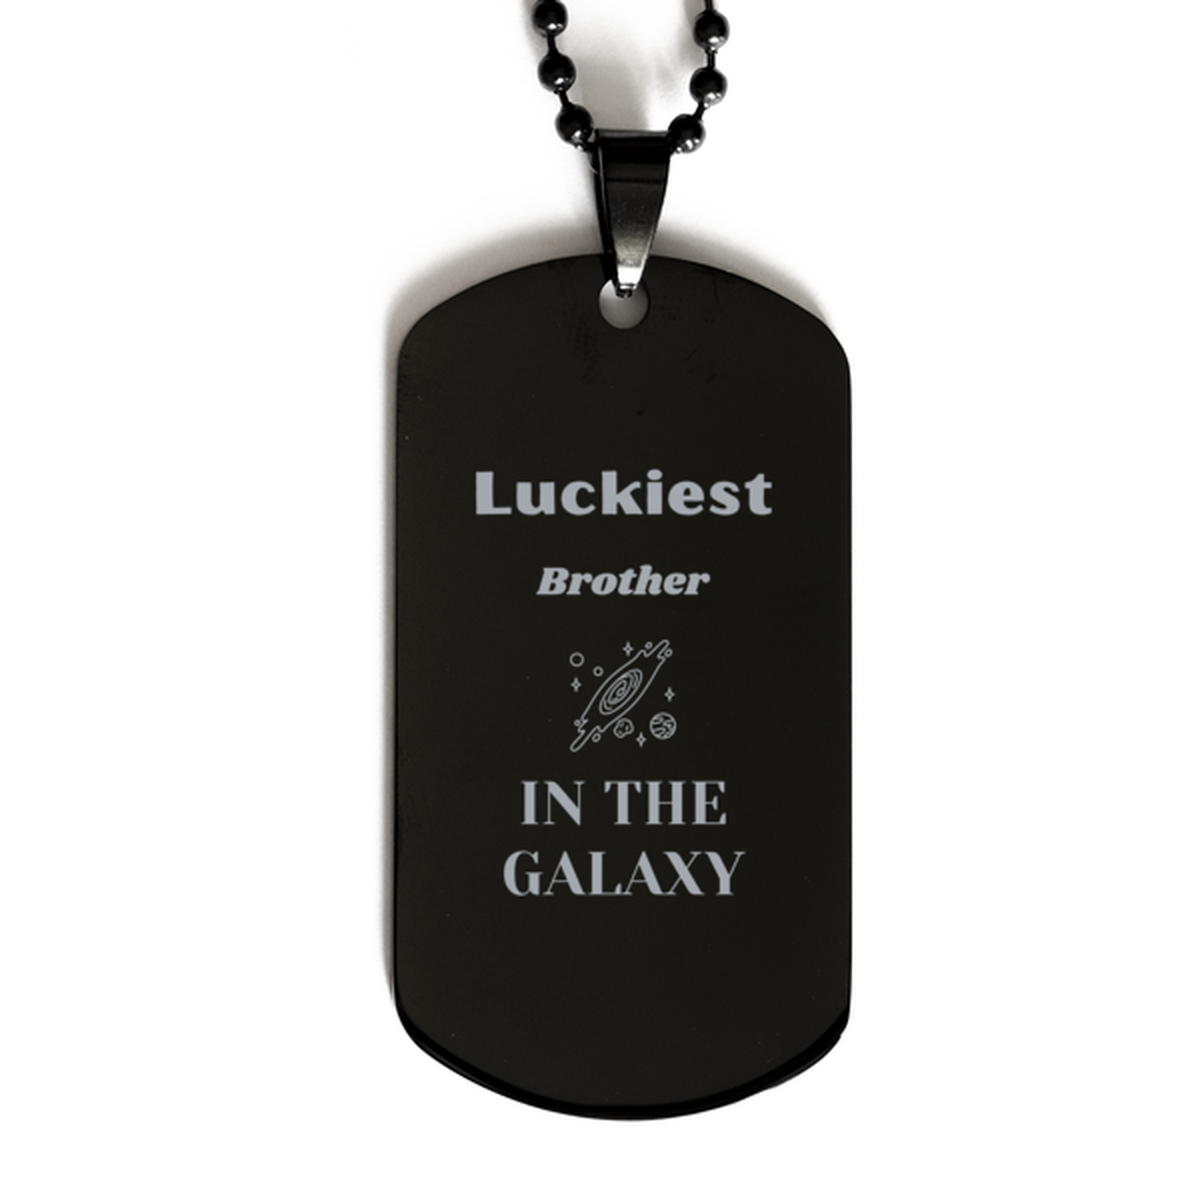 Luckiest Brother in the Galaxy, To My Brother Engraved Gifts, Christmas Brother Black Dog Tag Gifts, X-mas Birthday Unique Gifts For Brother Men Women